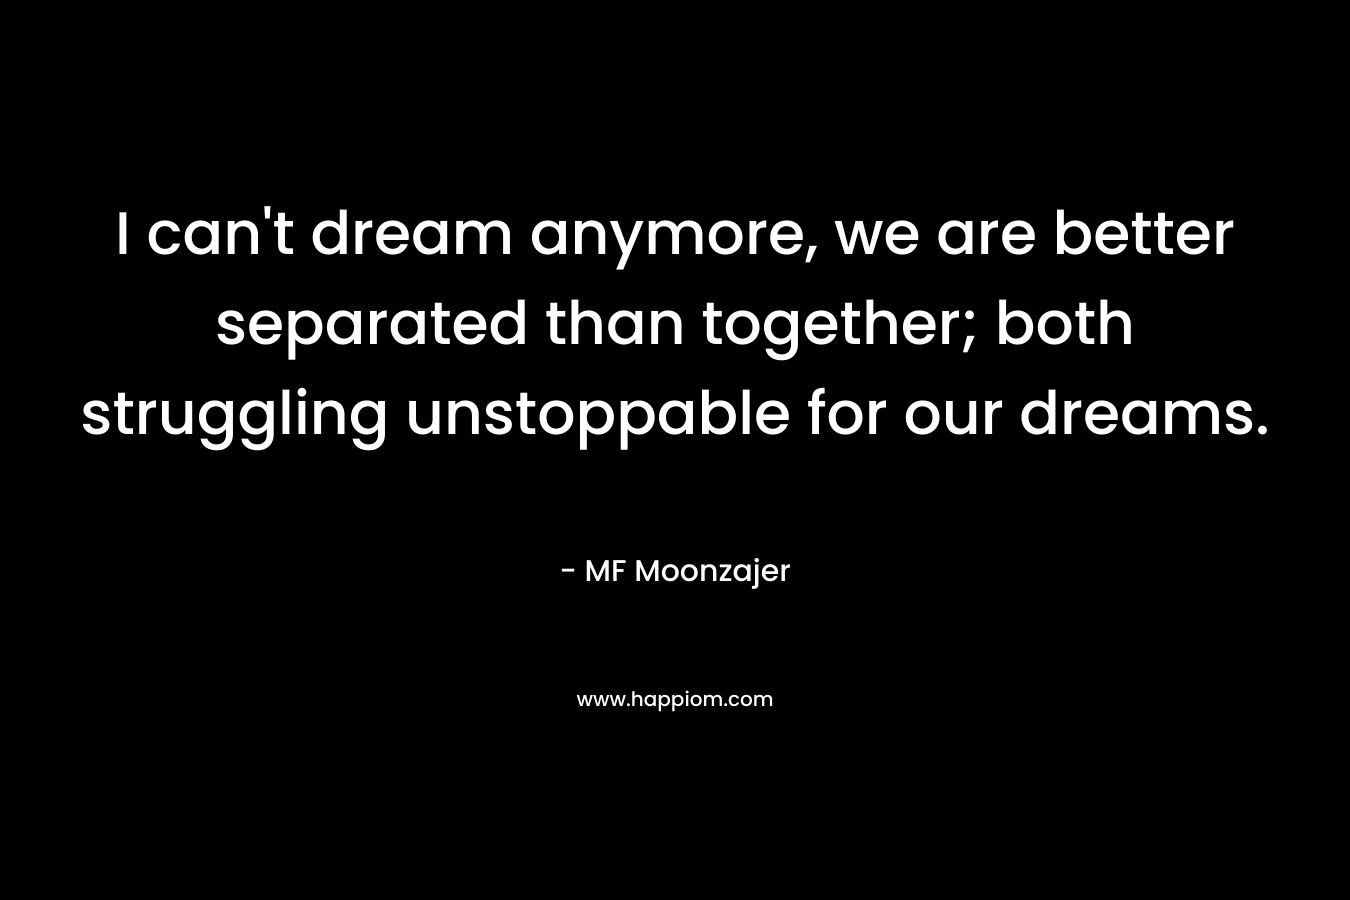 I can’t dream anymore, we are better separated than together; both struggling unstoppable for our dreams. – MF Moonzajer